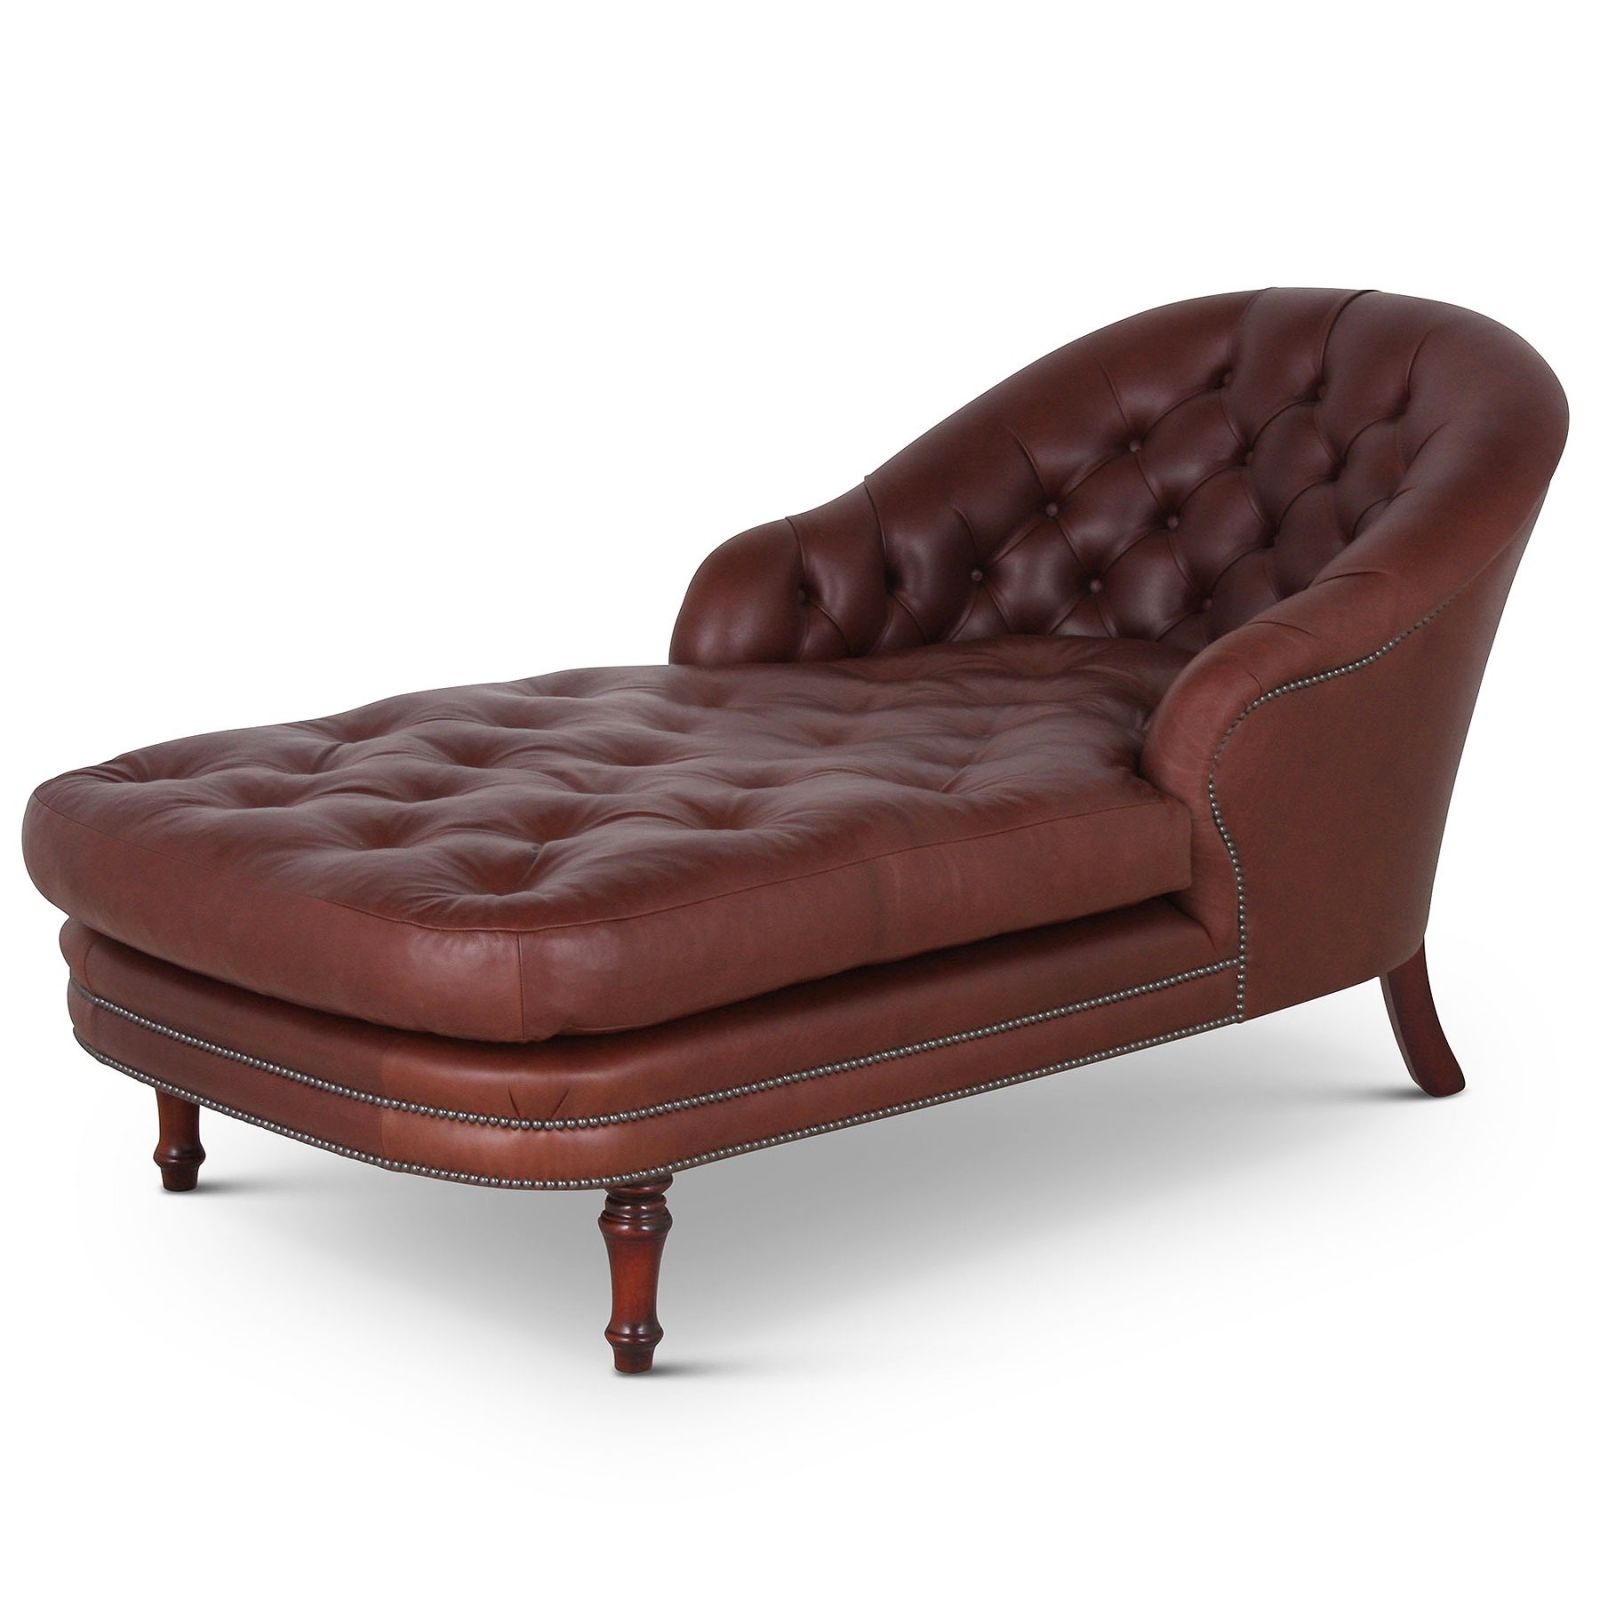 Buttoned leather chaise